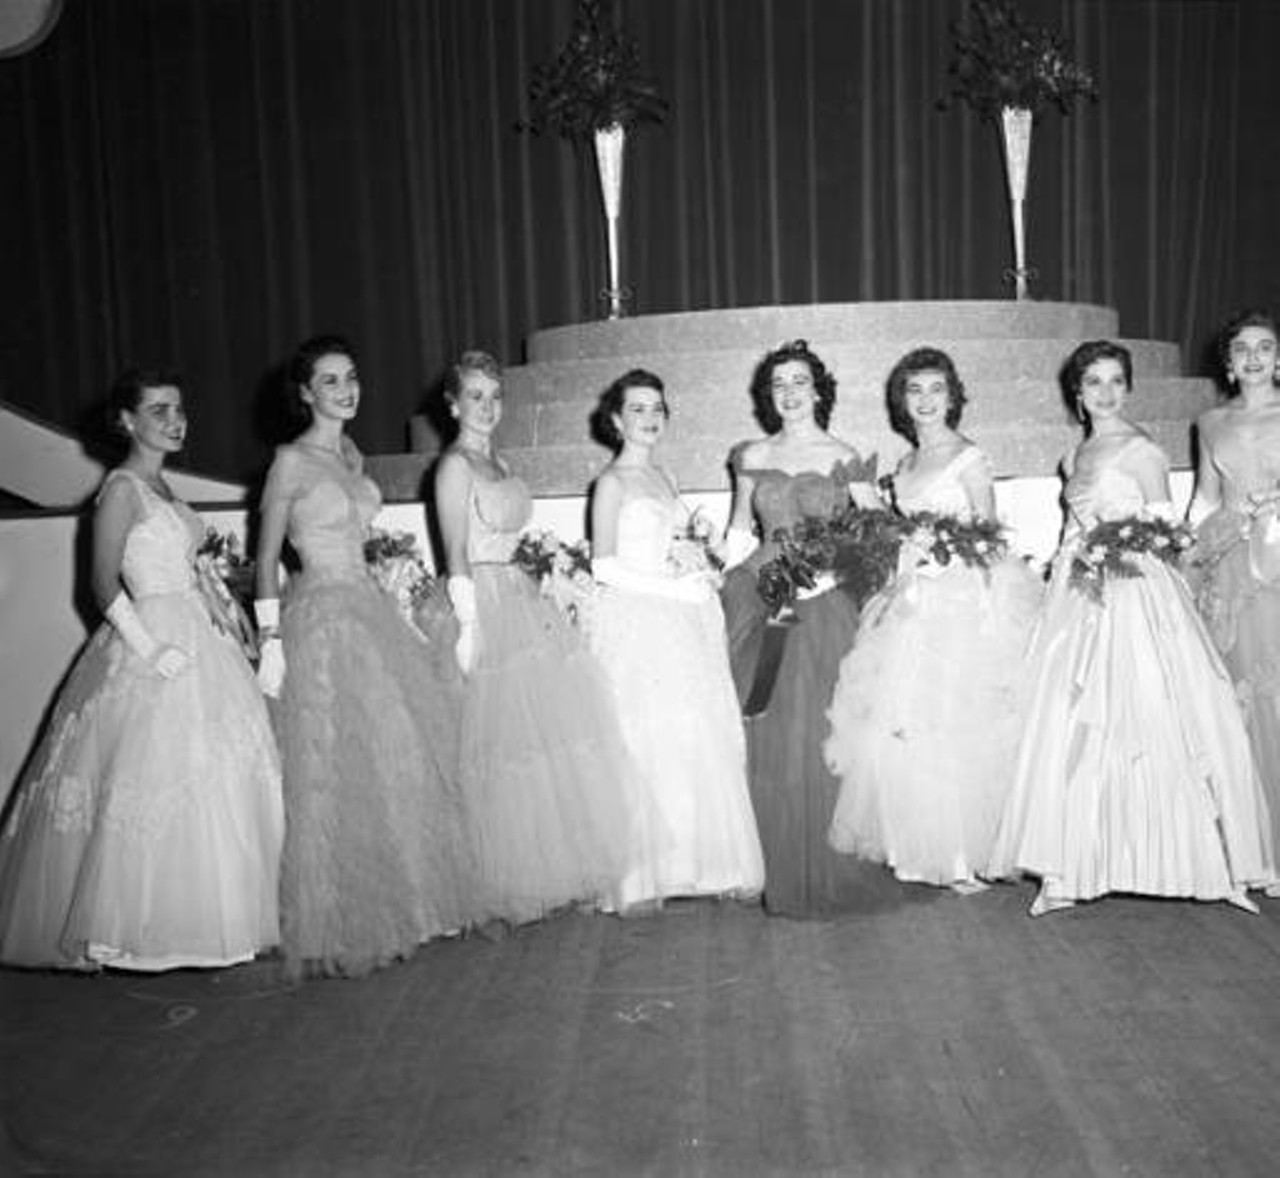 Miss Fiesta Presentation and Ball, 1955
Miss Fiesta dates back to the late 1940s. The title of Miss Fiesta appeared among the other Fiesta royalty with the invention of Fiesta Flambeau.
Photo via Zintgraff Studio Photo Collection